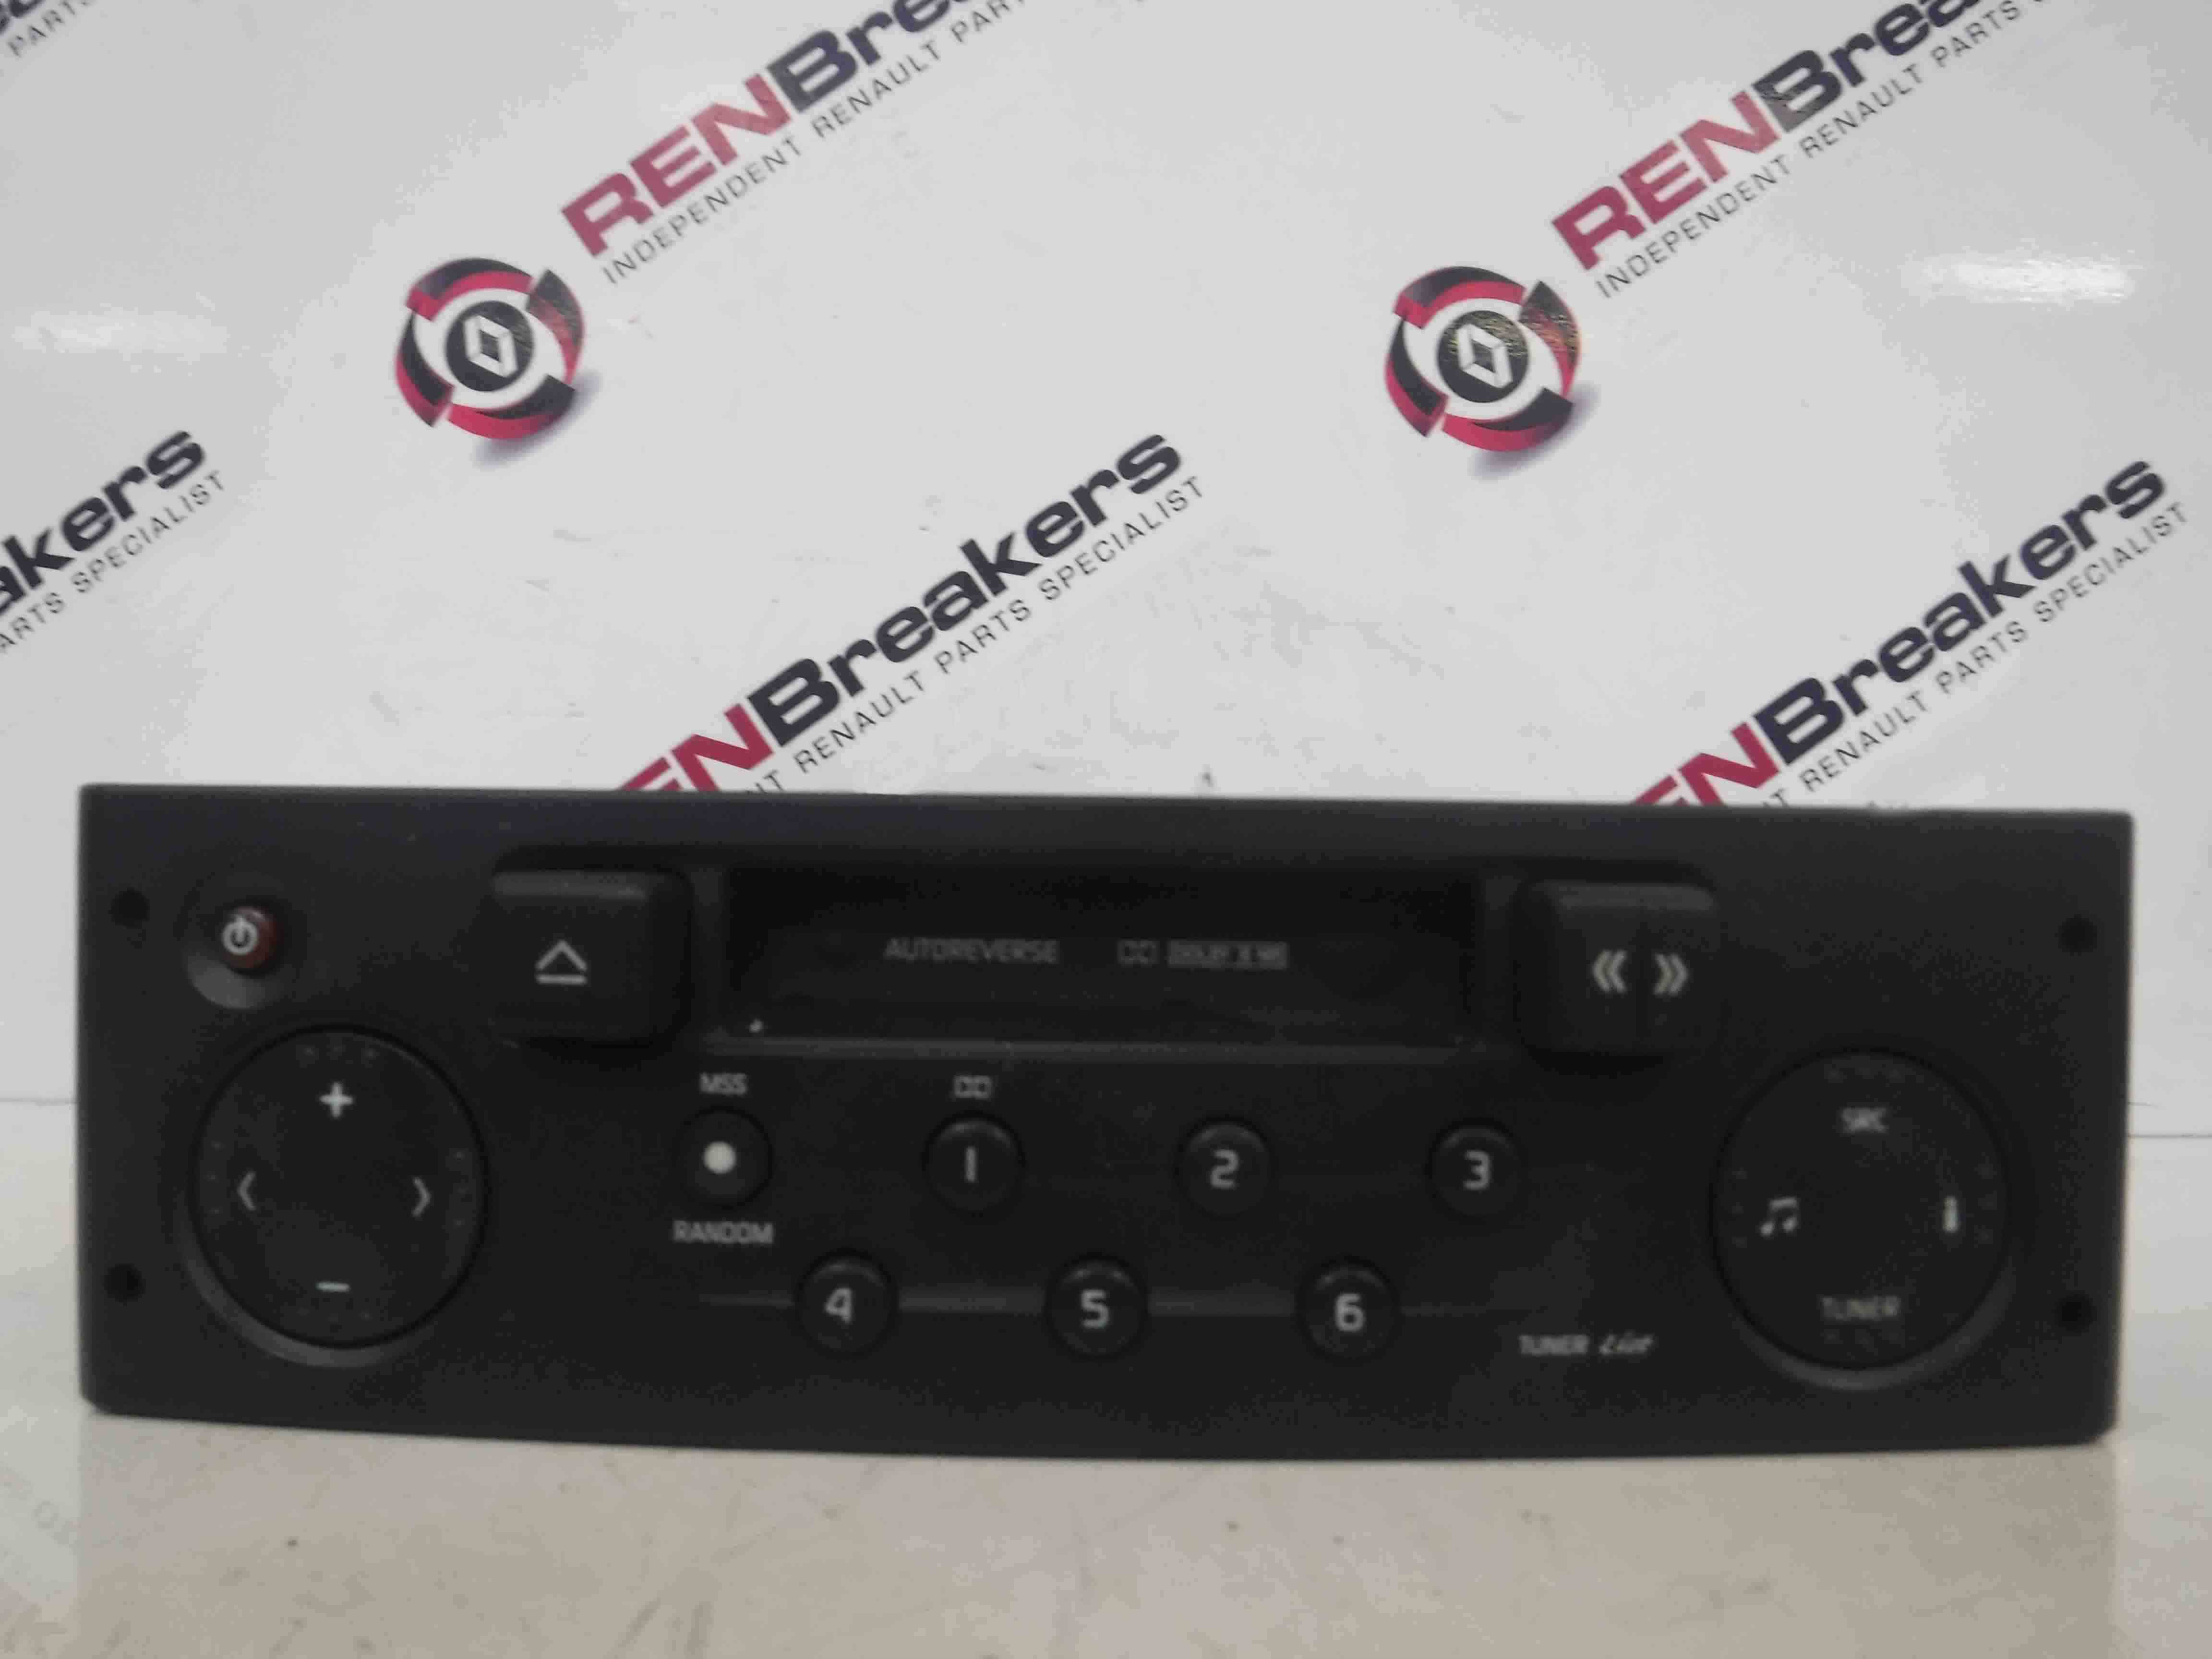 Renault Clio MK2 1998-2006 Tape Casette Player Code 8200029539 - Store - Renault Breakers Used Renault Parts & Specialist